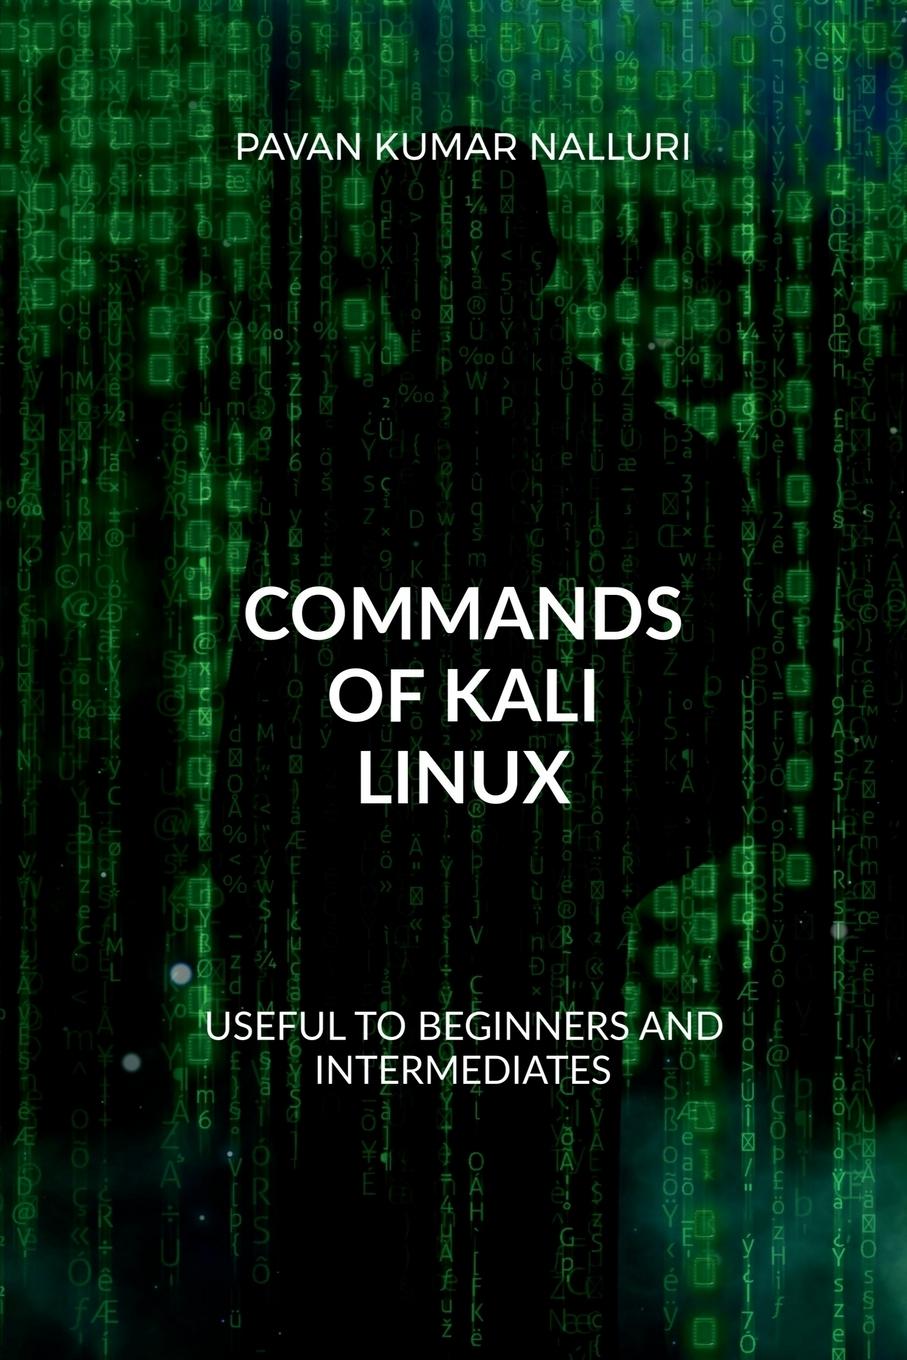 Book COMMANDS OF KALI LINUX 